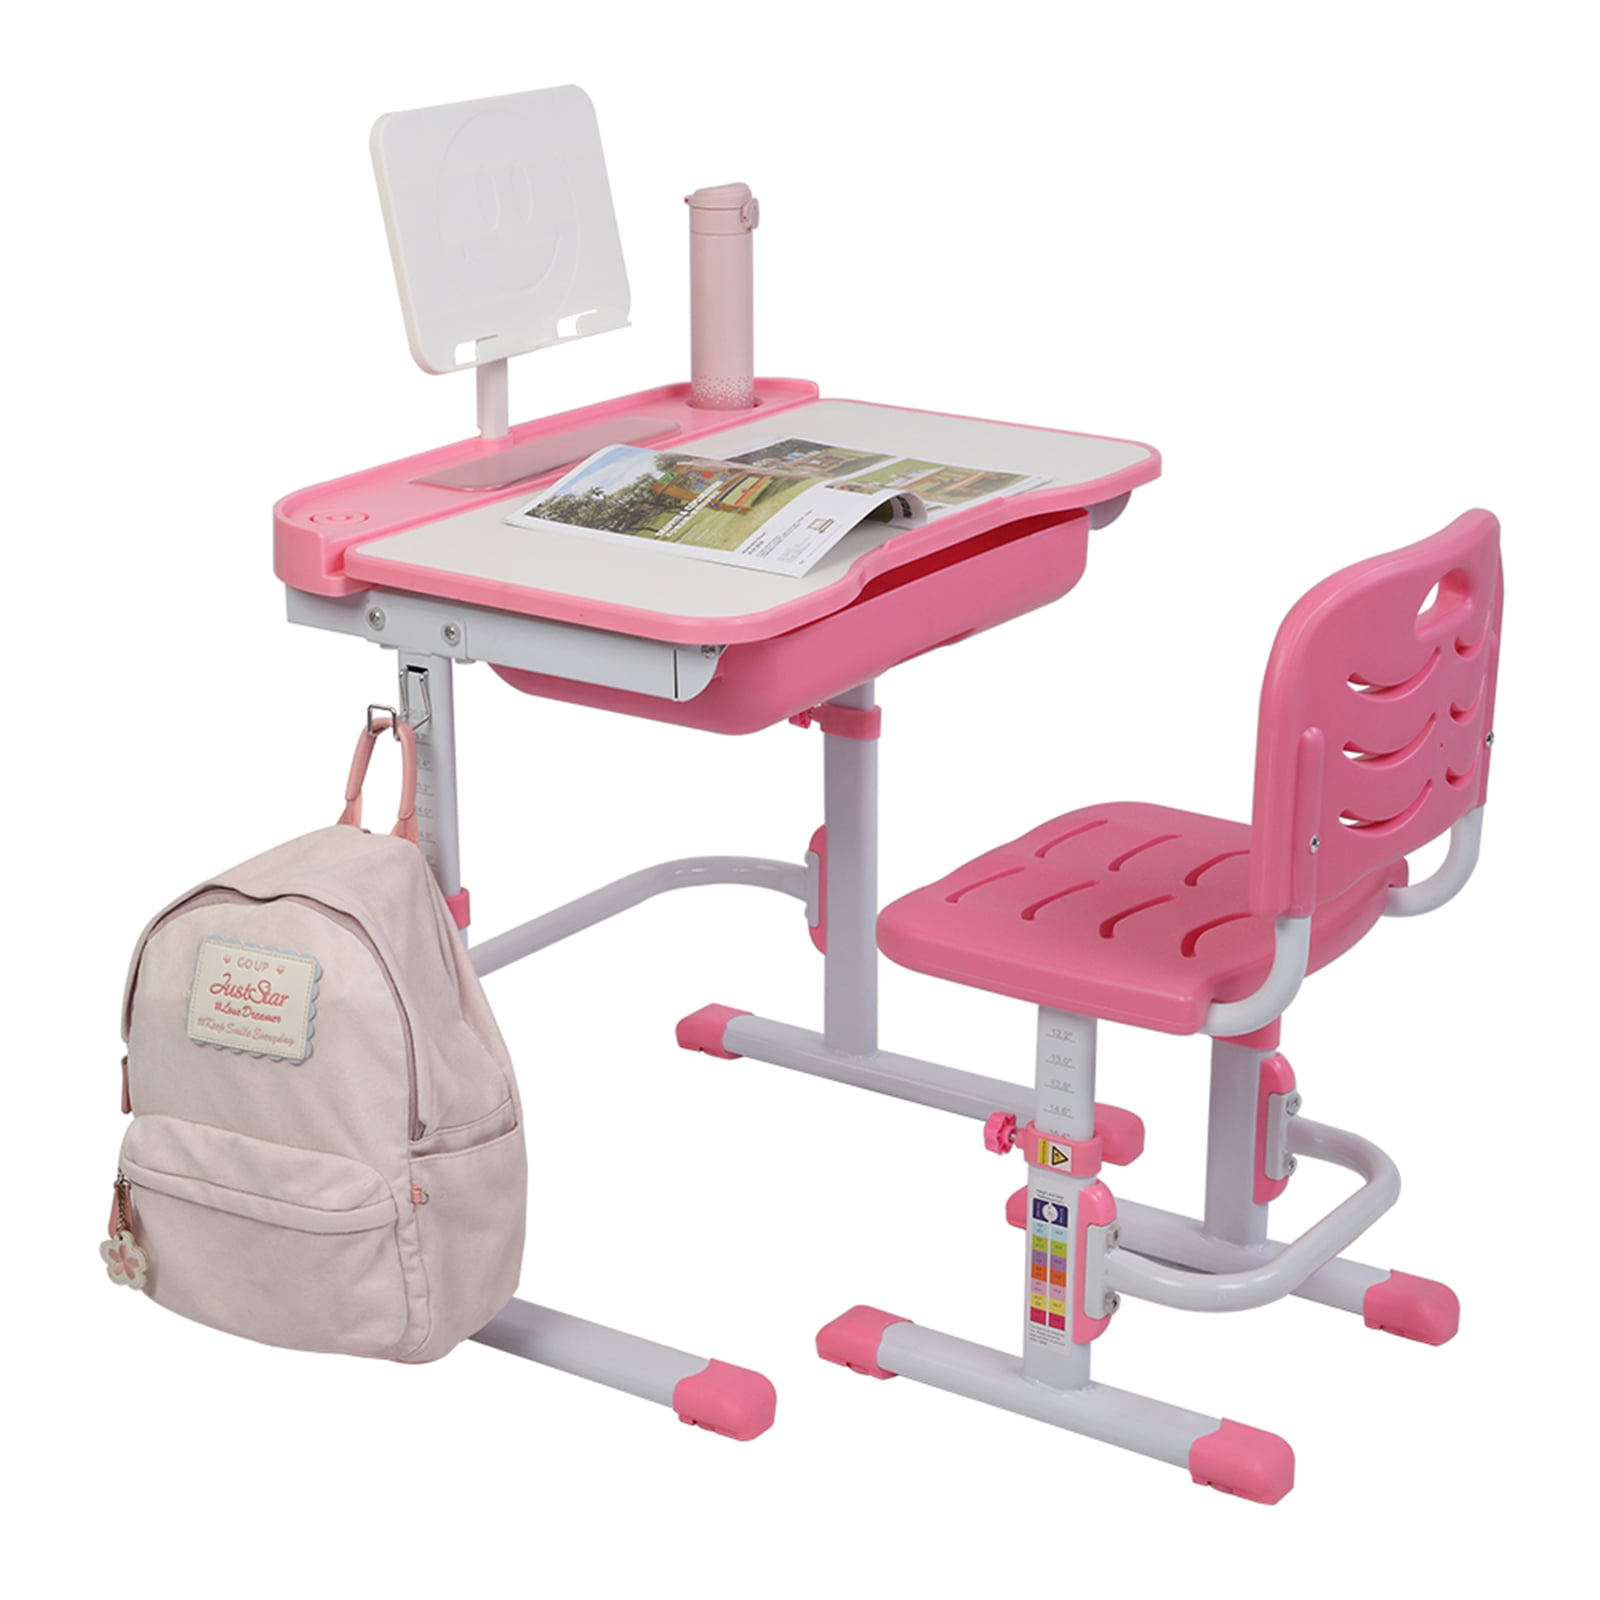 Details about   Kids Study Desk Chair Set Height Adjustable Children Table Drawer Lamp Pink2 